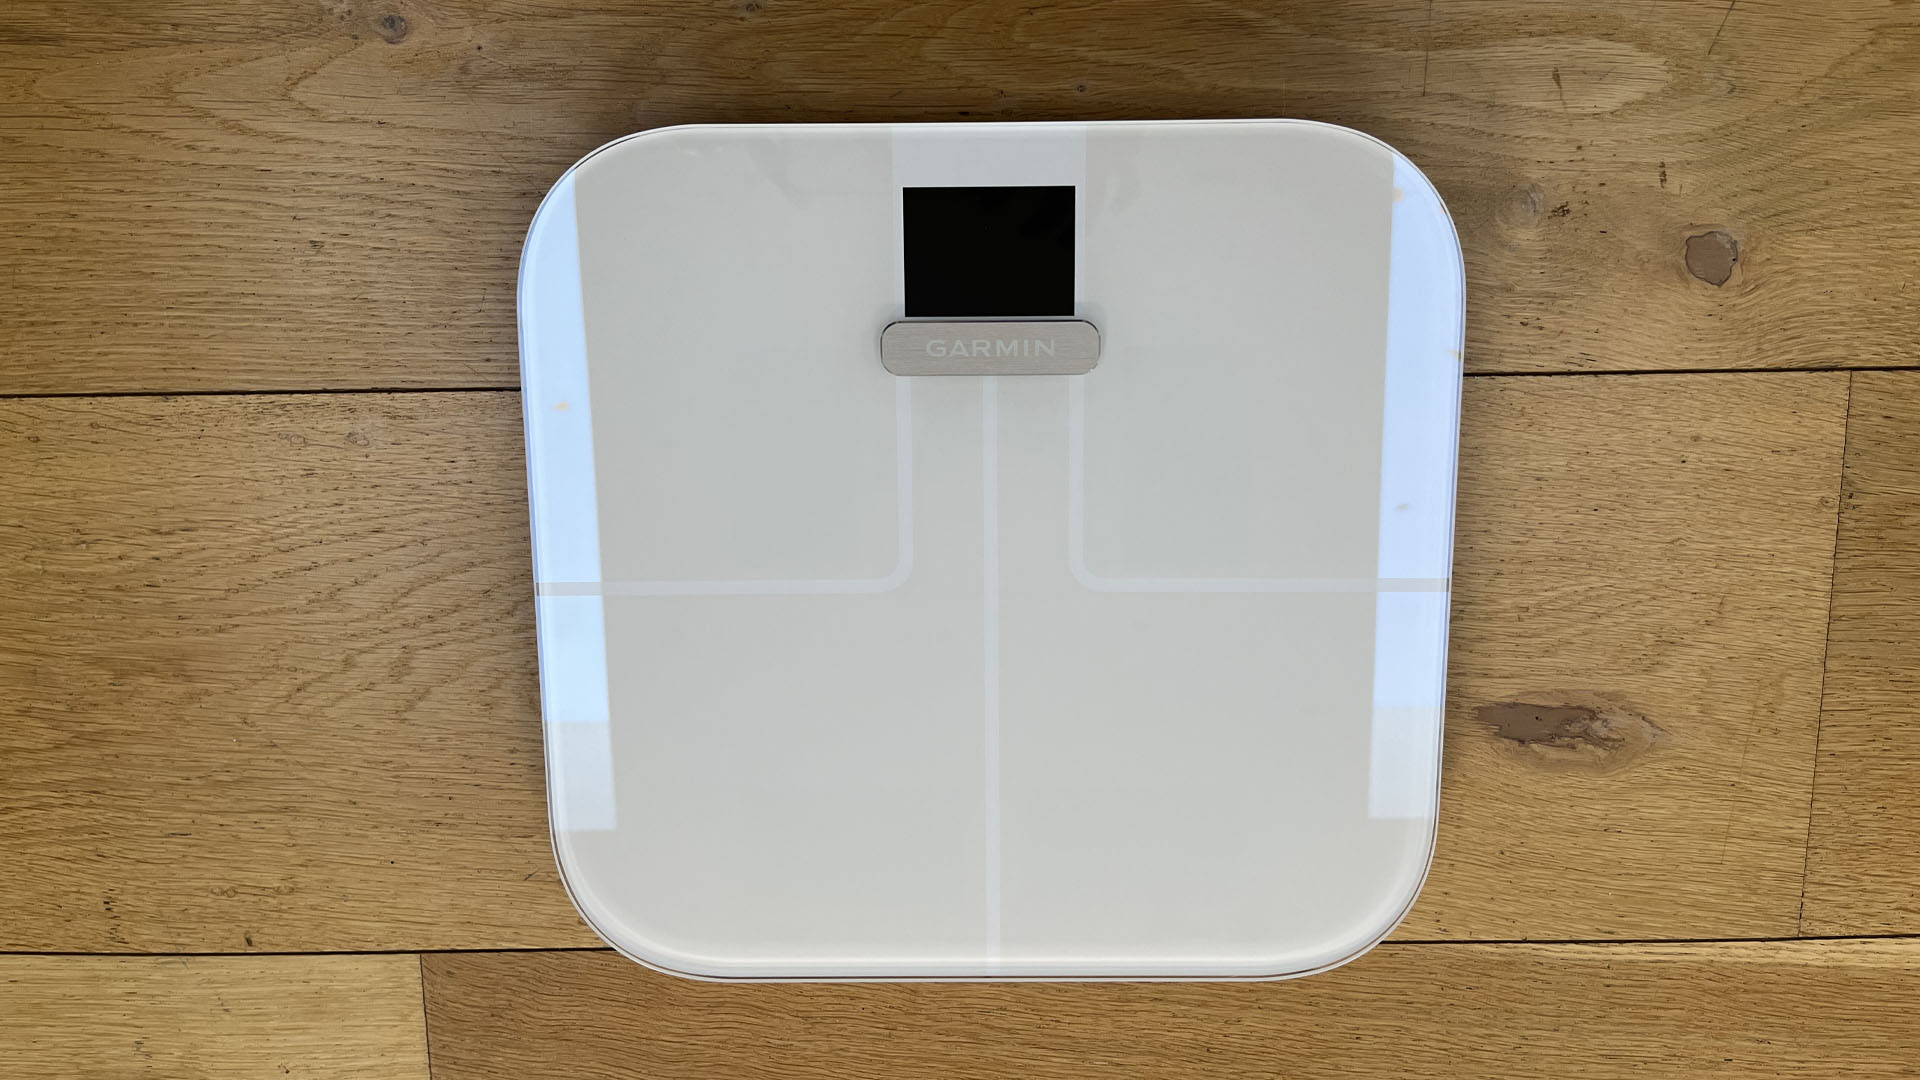 Garmin Index S2 smart scale review | Live Science